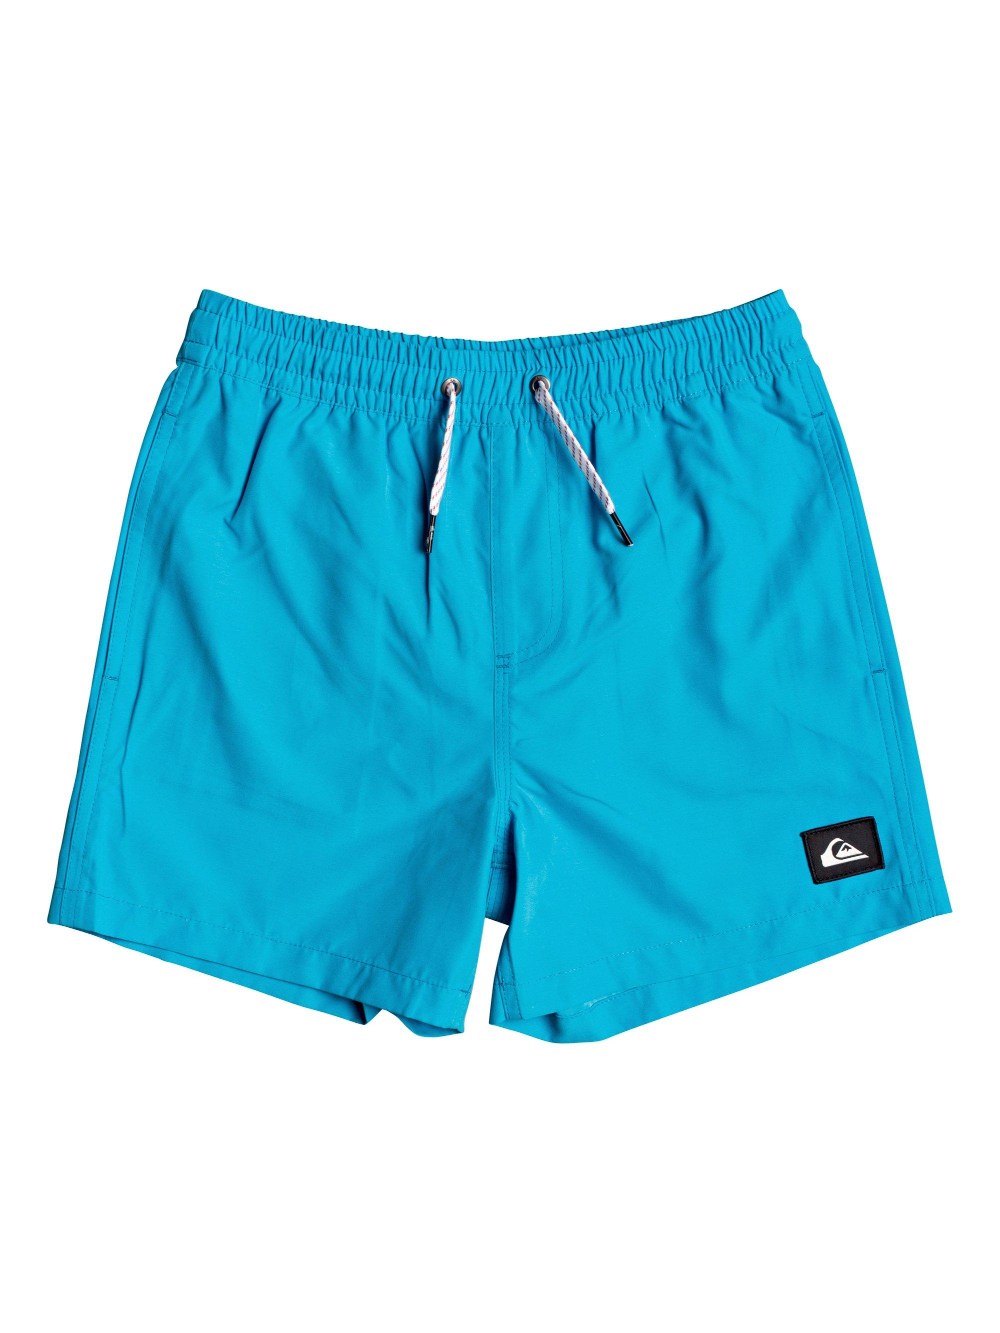 BAADOR EVERYDAY VOLLEY YOUTH 13 POLYESTER BLITHE